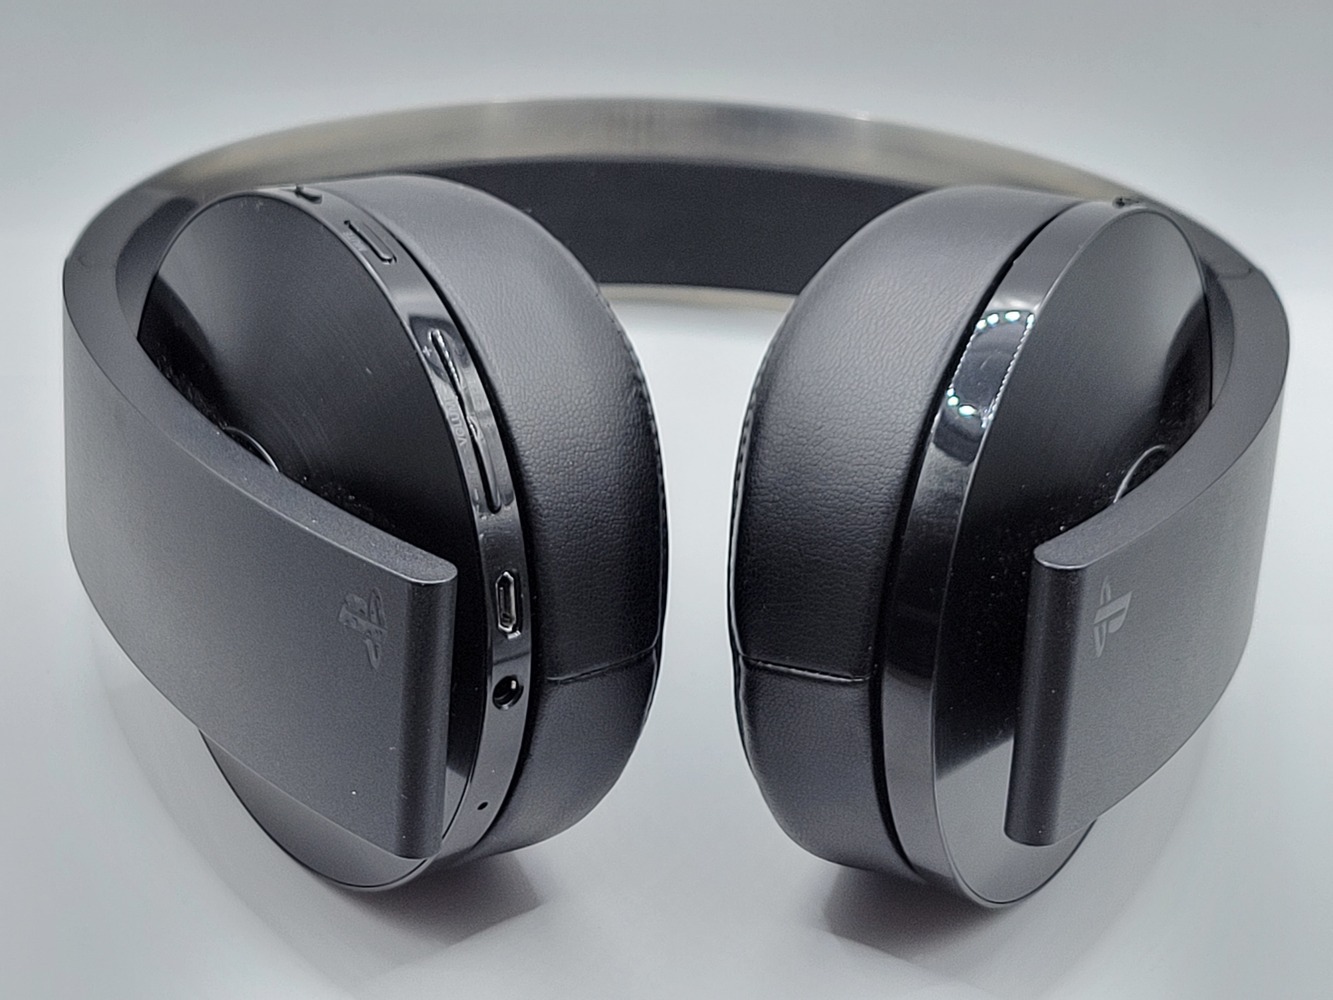 PlayStation Platinum Wireless Headset for PS4